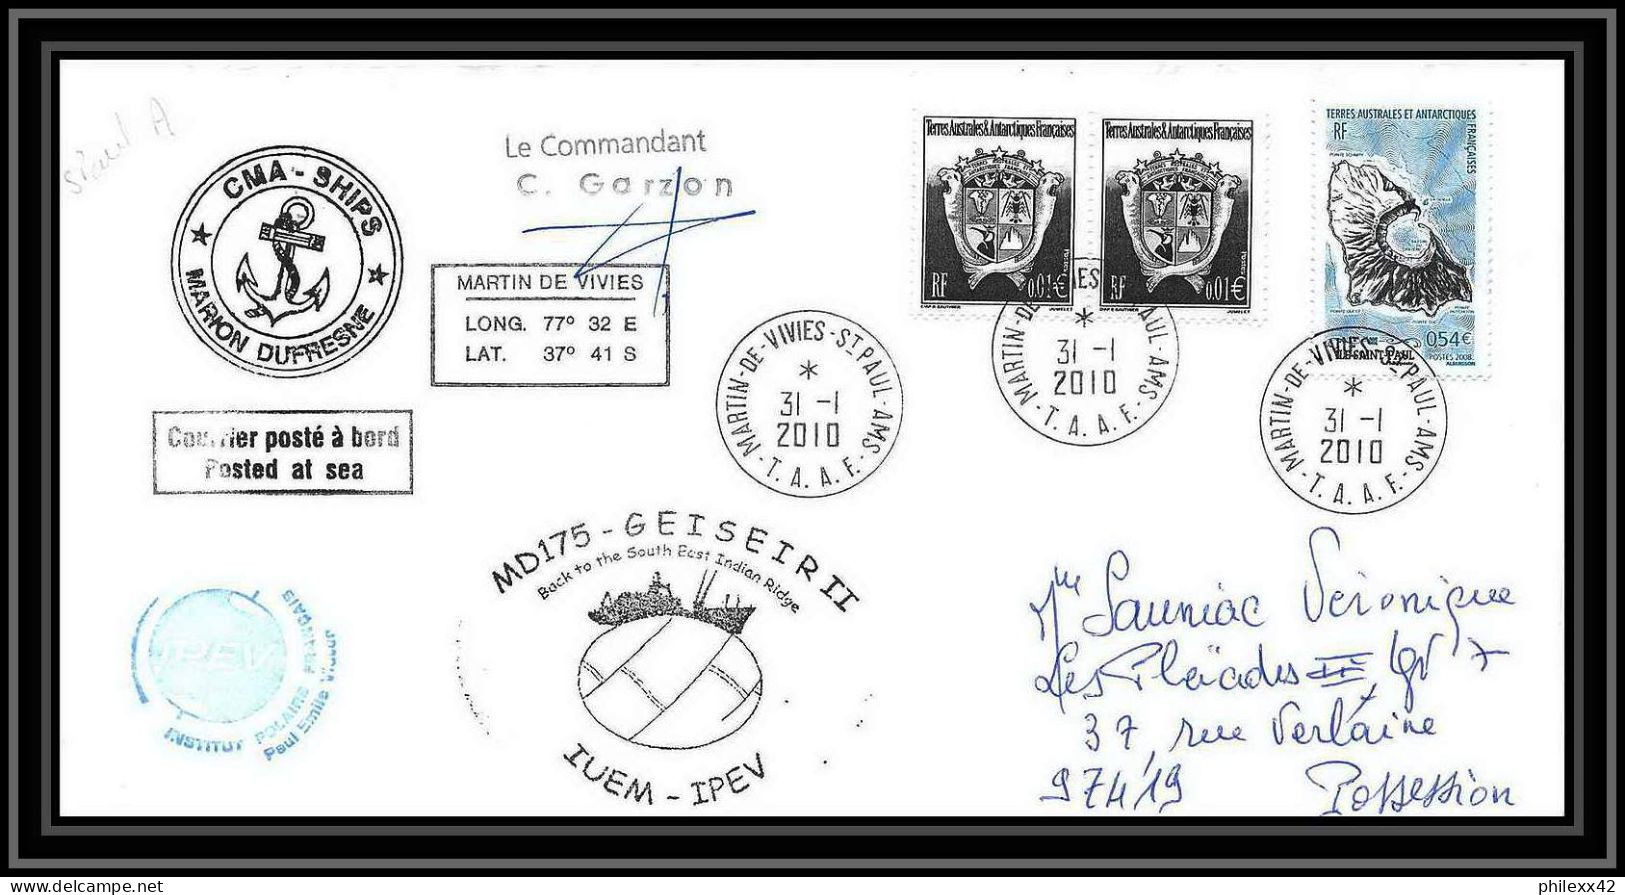 2985 ANTARCTIC Terres Australes TAAF Lettre Cover Dufresne 2 Signé Signed MD 175 31/1/2010 N°506 - Antarktis-Expeditionen